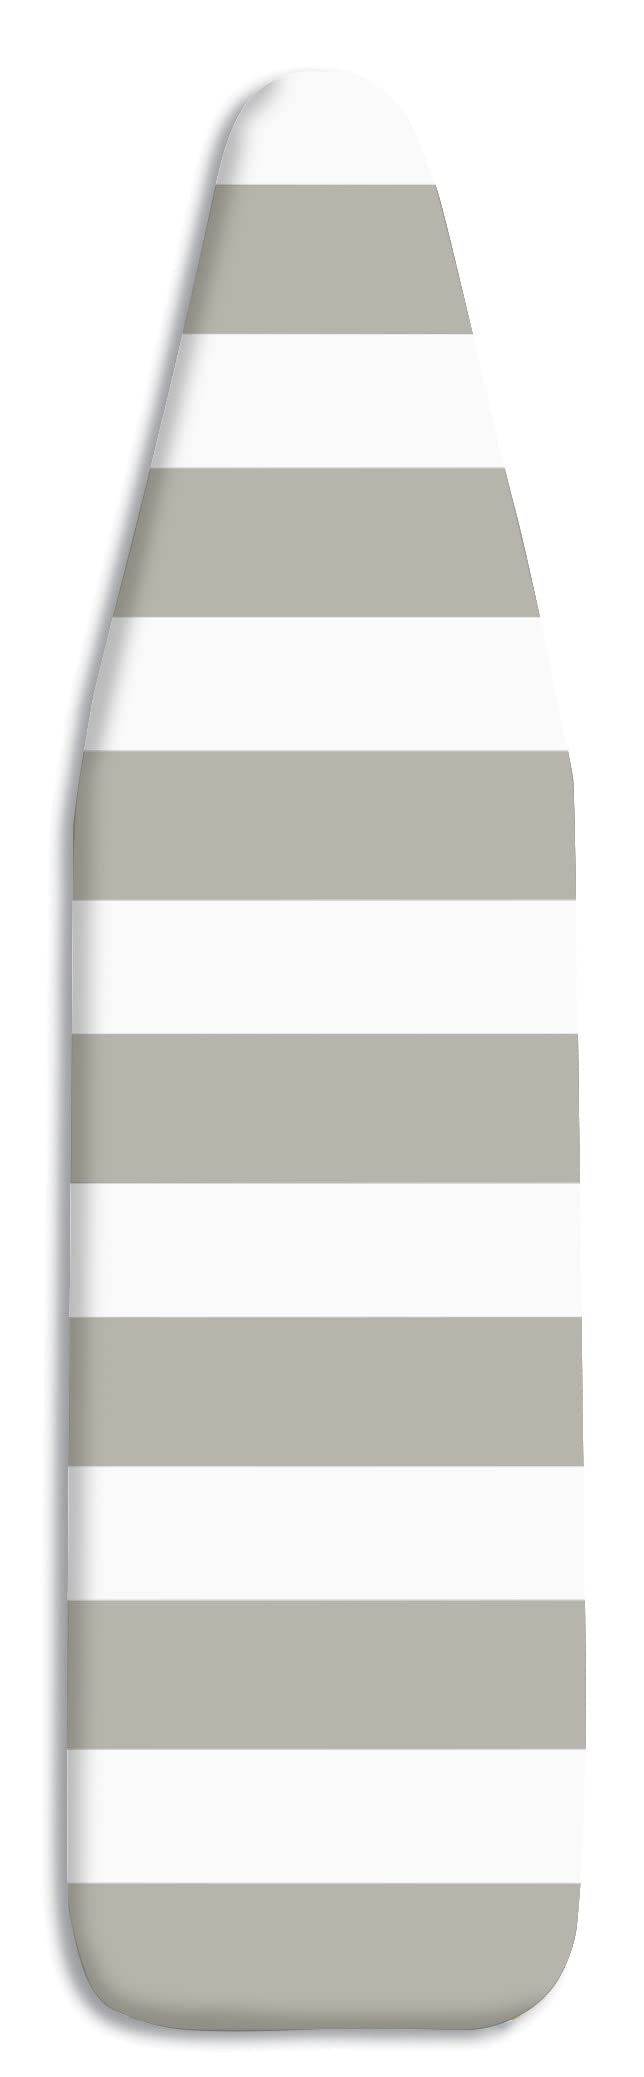 Whitmor Ironing Board Cover with Pad, Paloma Gray Stripe, Cotton, 54